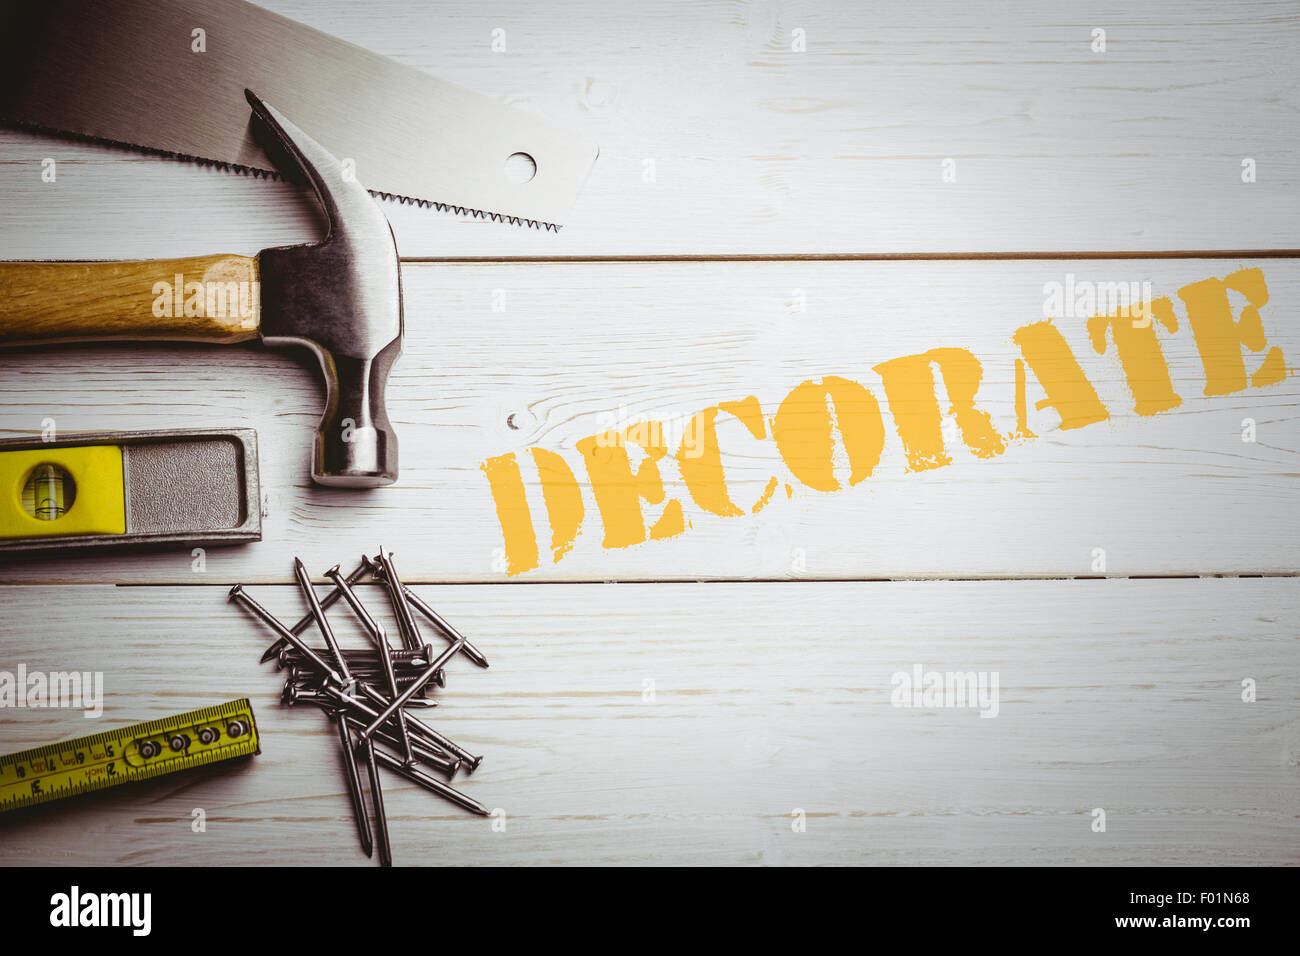 Decorate  against desk with tools Stock Photo